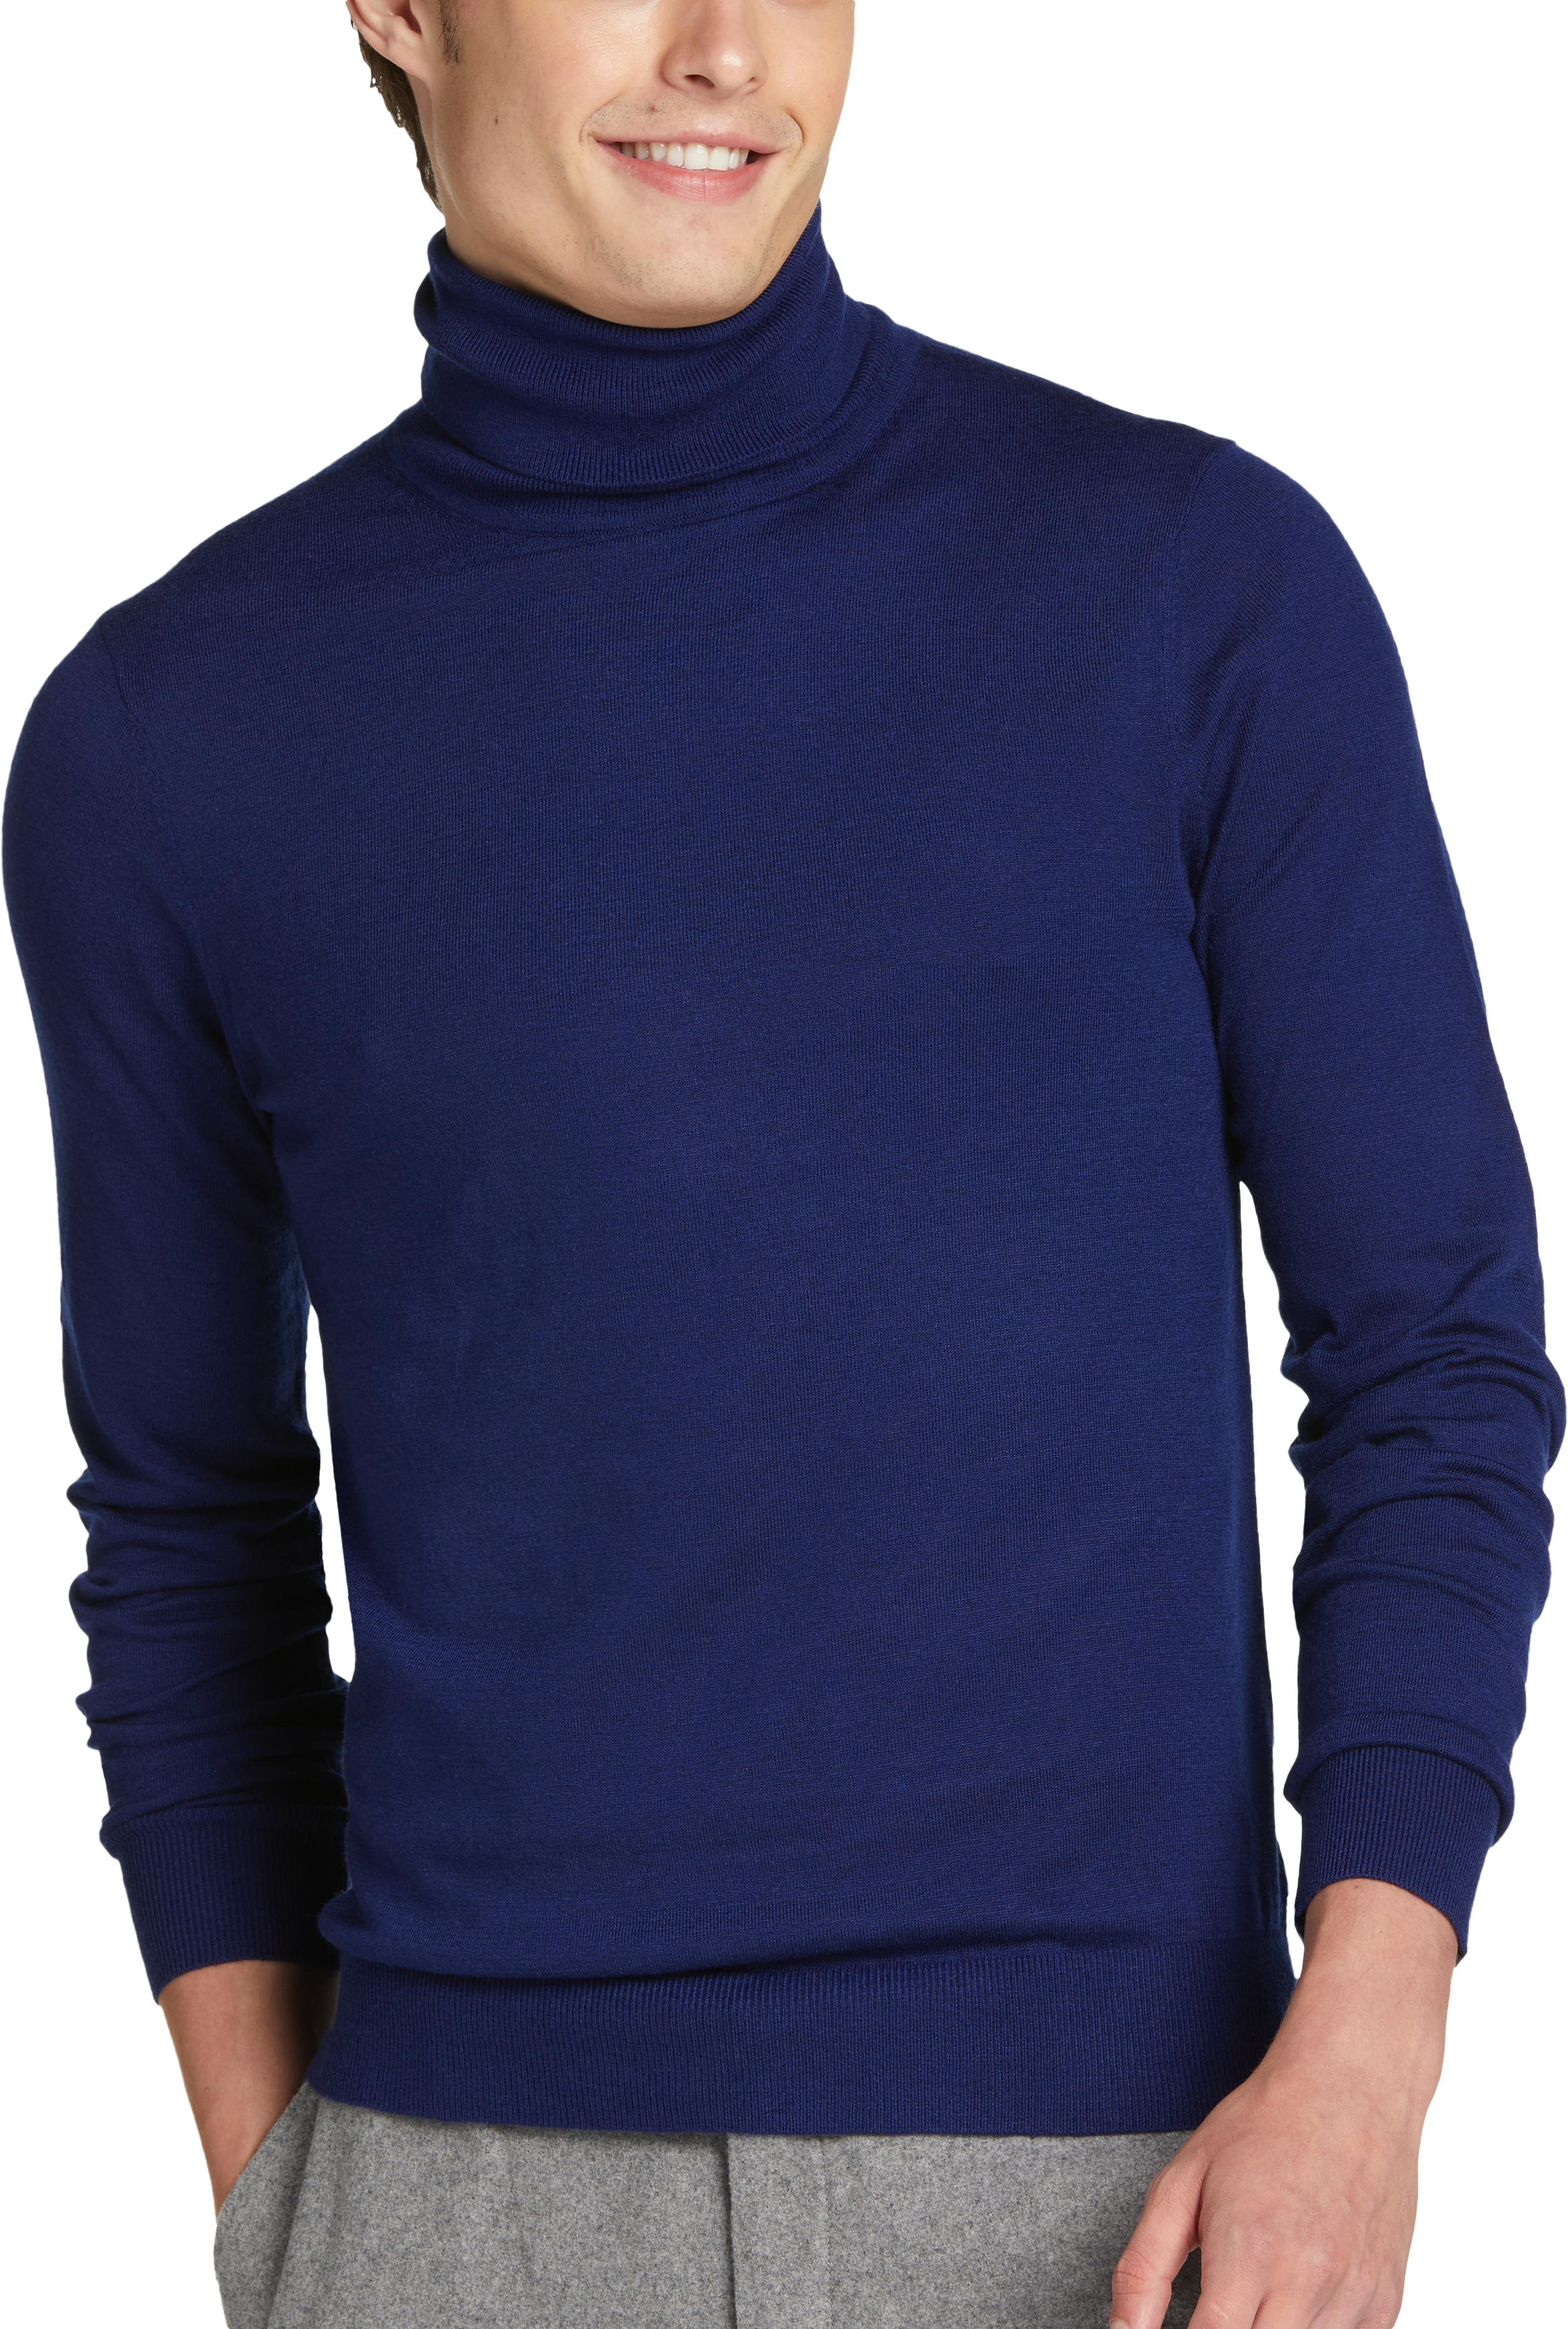 Paisley u0026Amp; Gray Slim Fit Turtleneck Sweater | All Clearance $39.99|  Men's Wearhouse